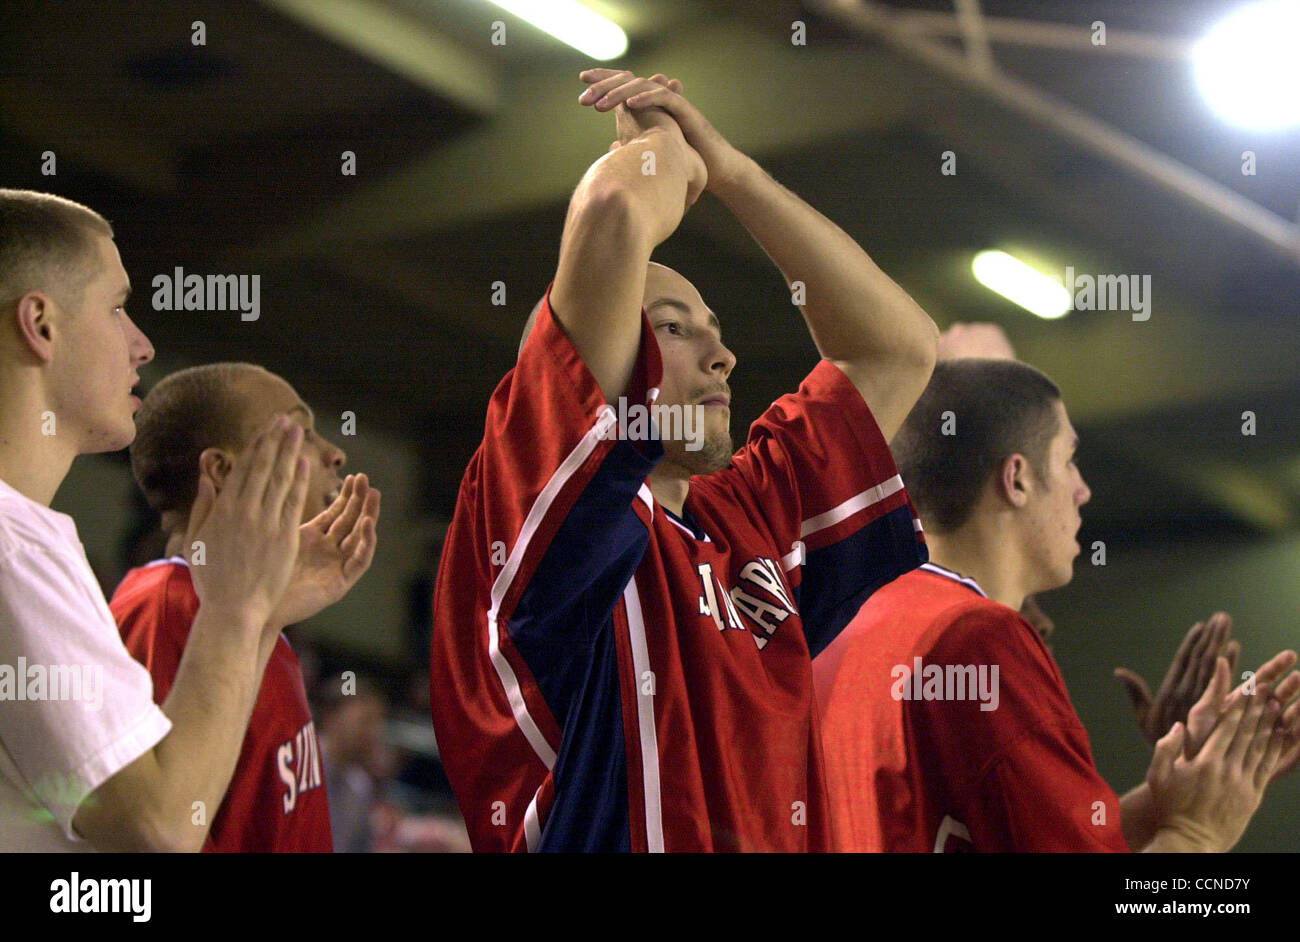 (For future Marcus Thompson feature) Saint Mary's College basketball player Jordan Boreman cheers on his team as they take on Loyola Marymount University at Saint Mary's in Moraga, Calif. Thursday, February 26, 2004. (Contra Costa Newspapers/Kristopher Skinner) Stock Photo